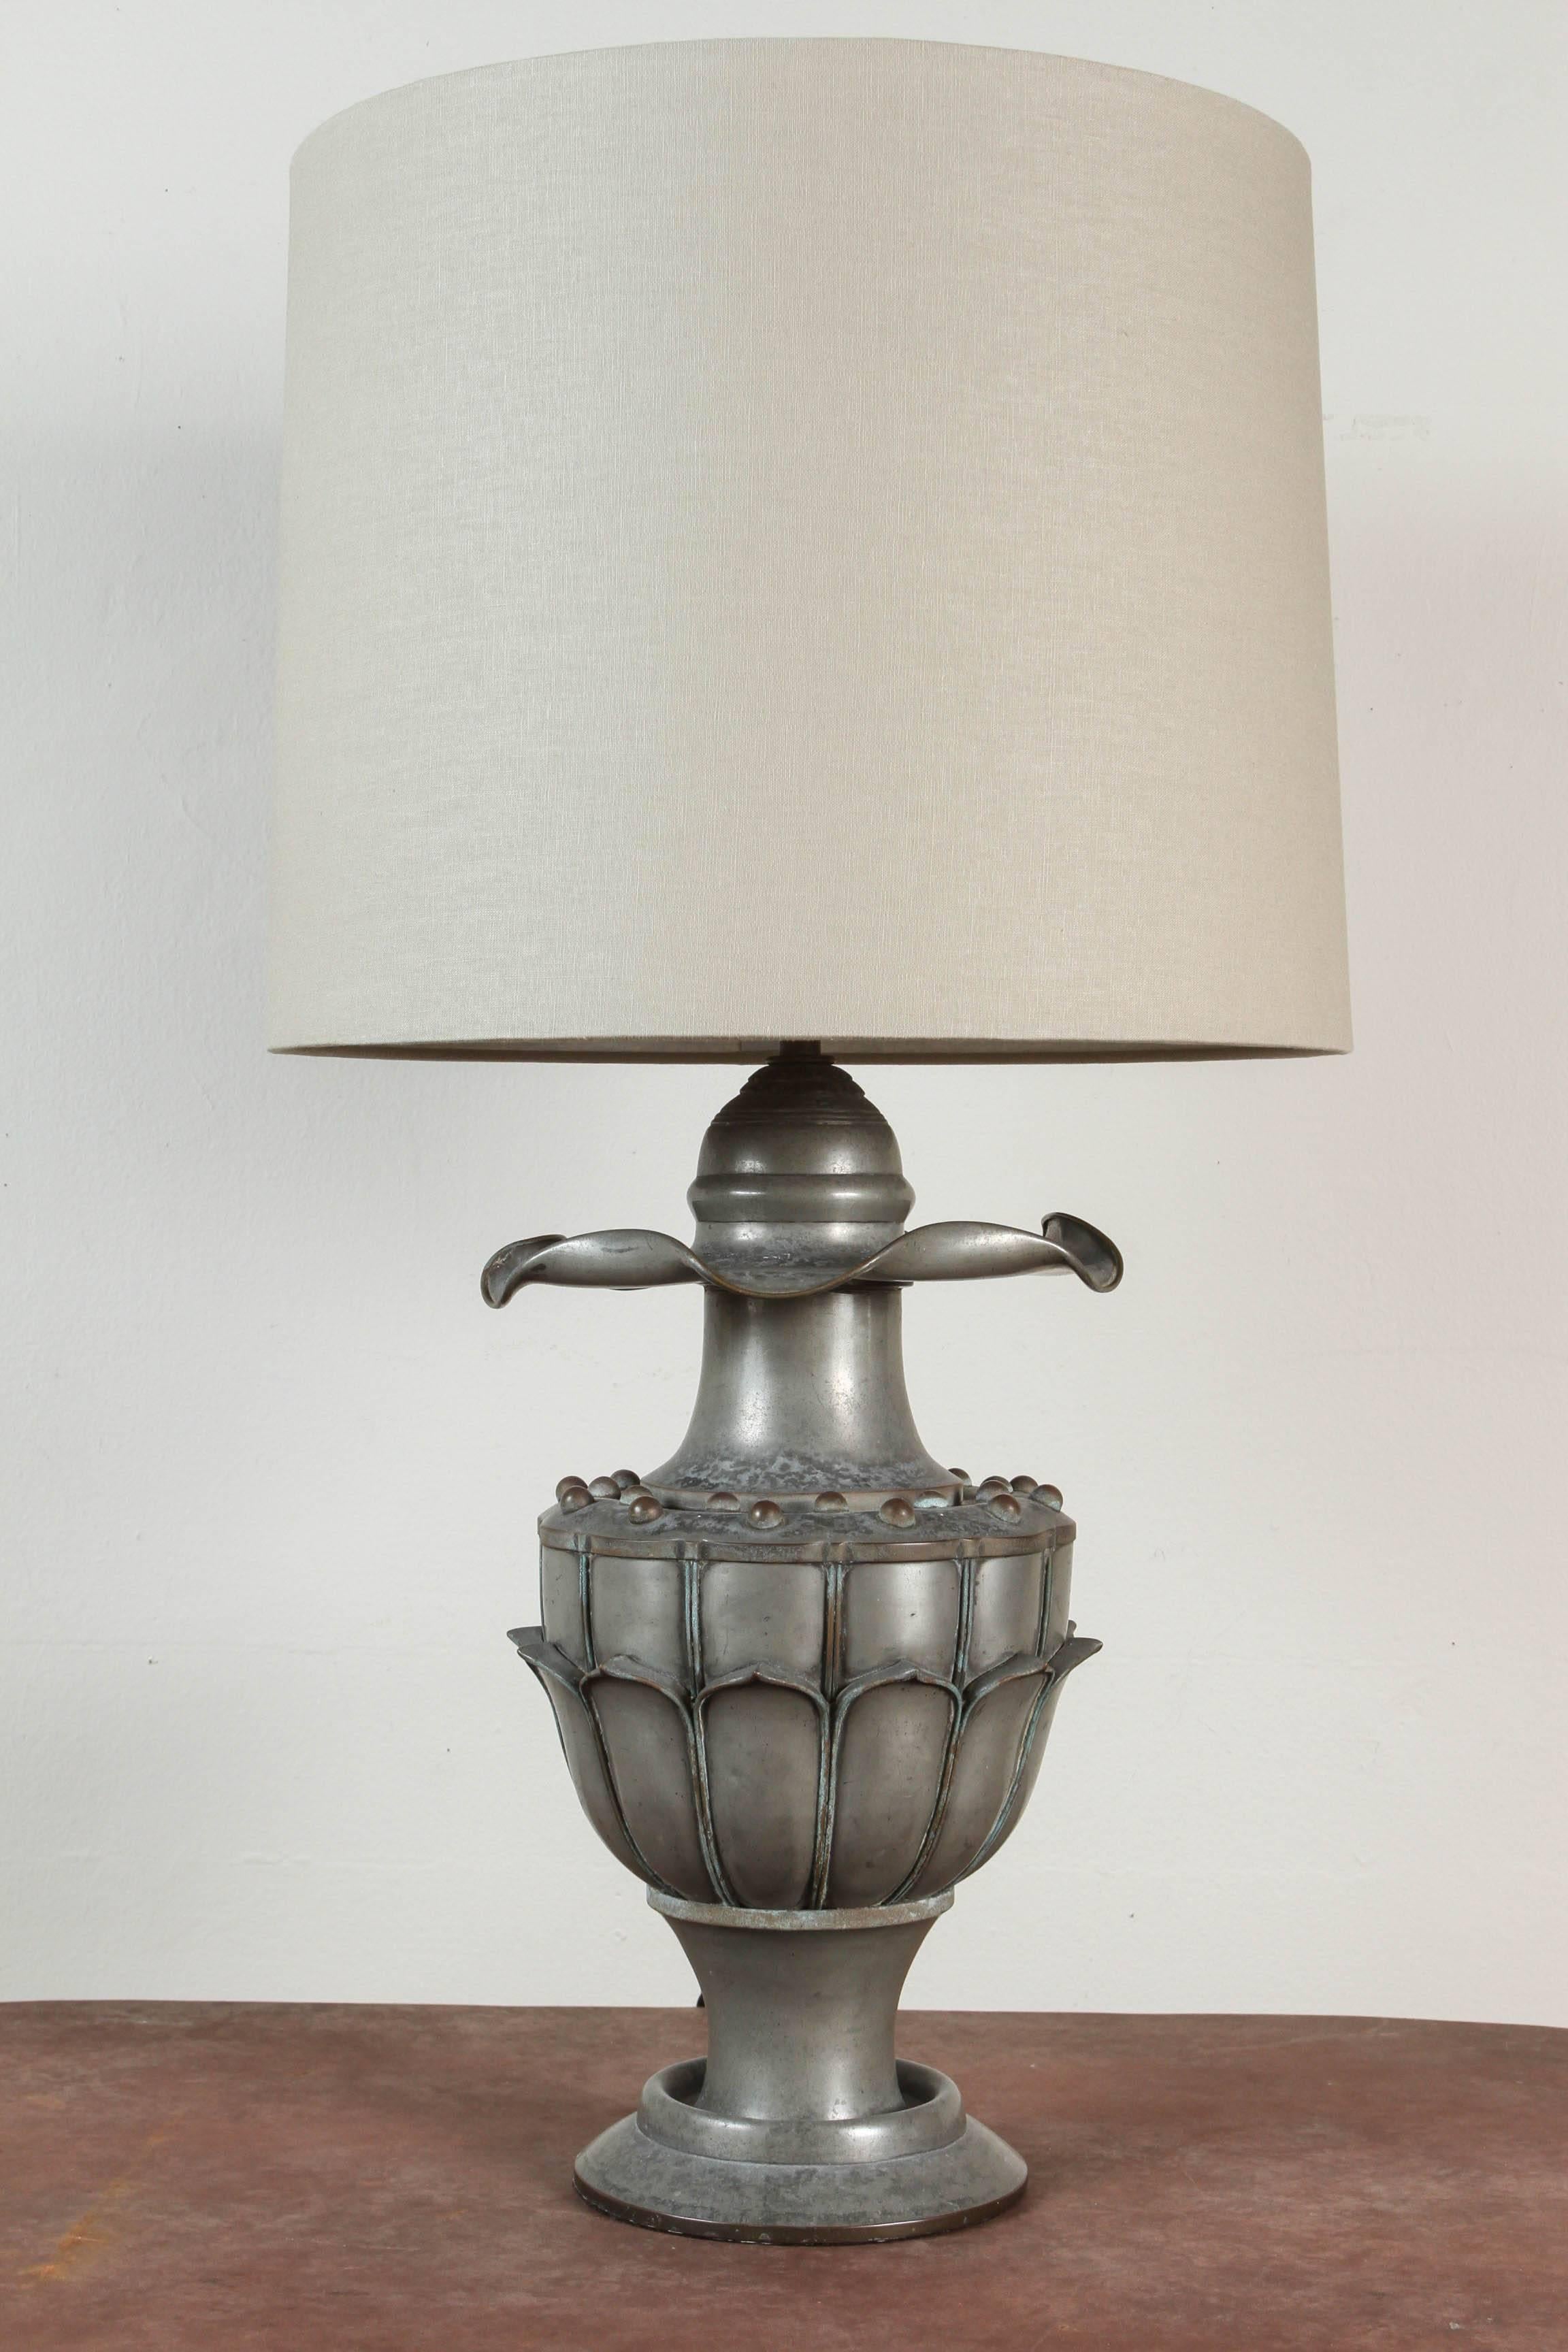 Early 20th century Chinese zinc work table lamp. Original triple cluster with pull chain sockets has been updated and rewired with black silk European style twist cord. Custom taupe linen shade with diffuser. Original finial.